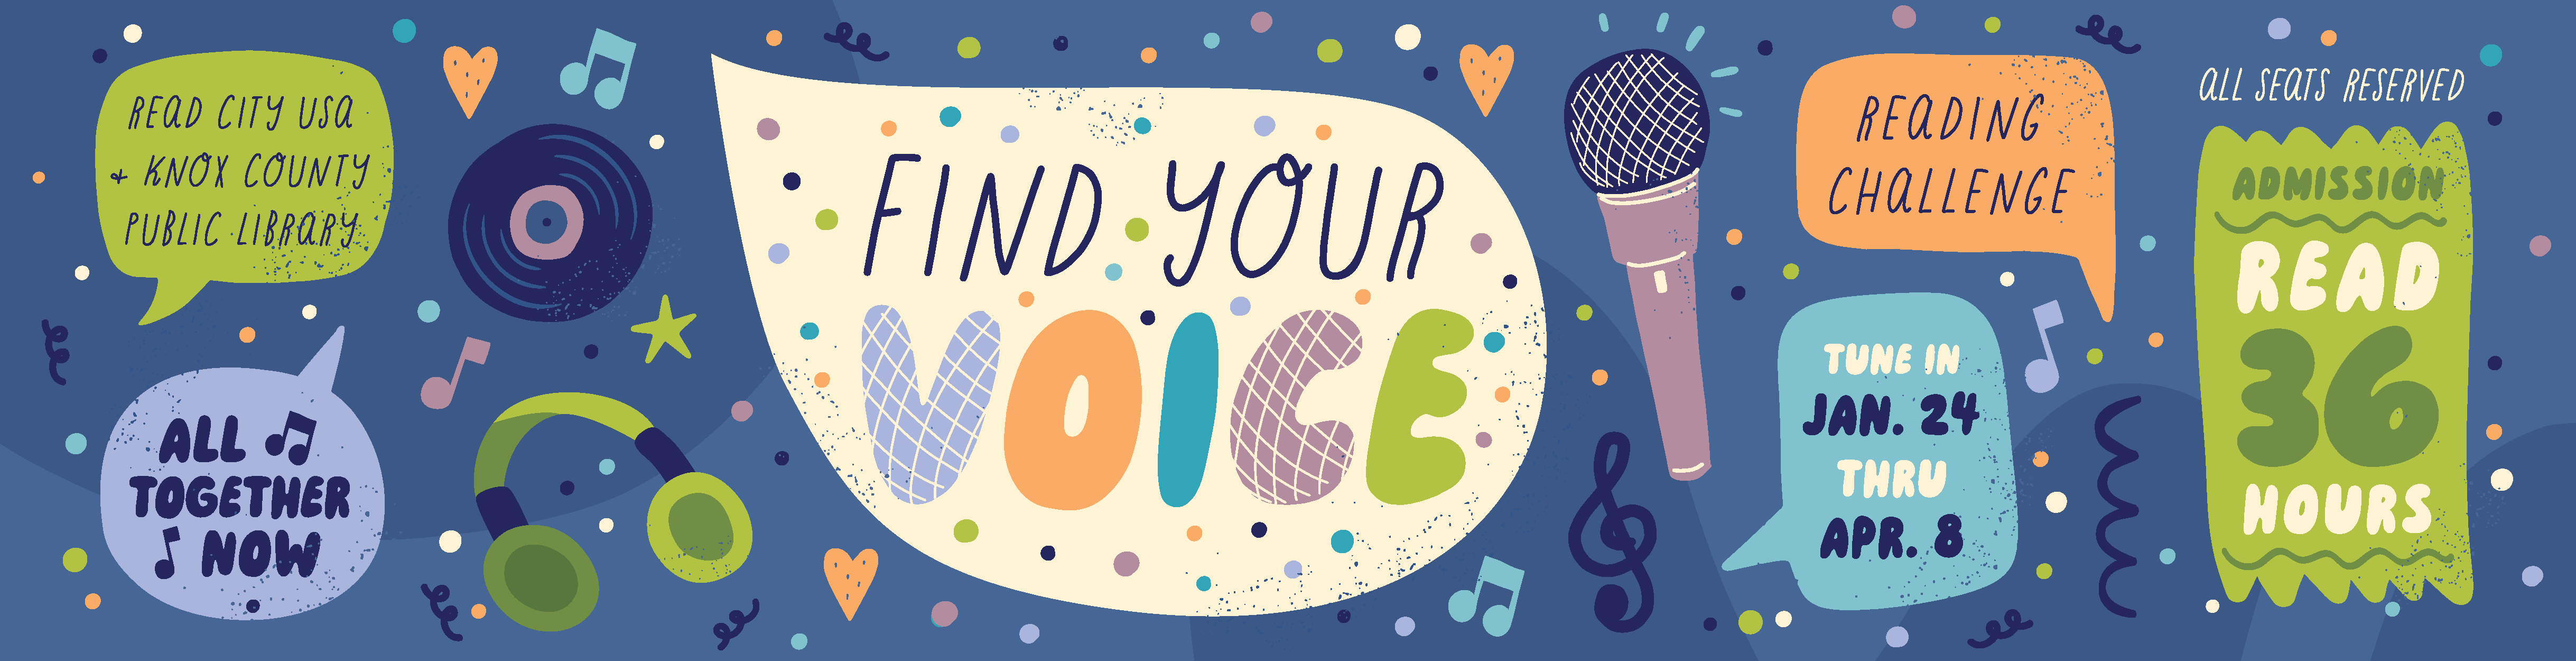 Find Your Voice Reading Challenge - Read 36 hours - Jan. 24 - Apr. 8 - All Together Now